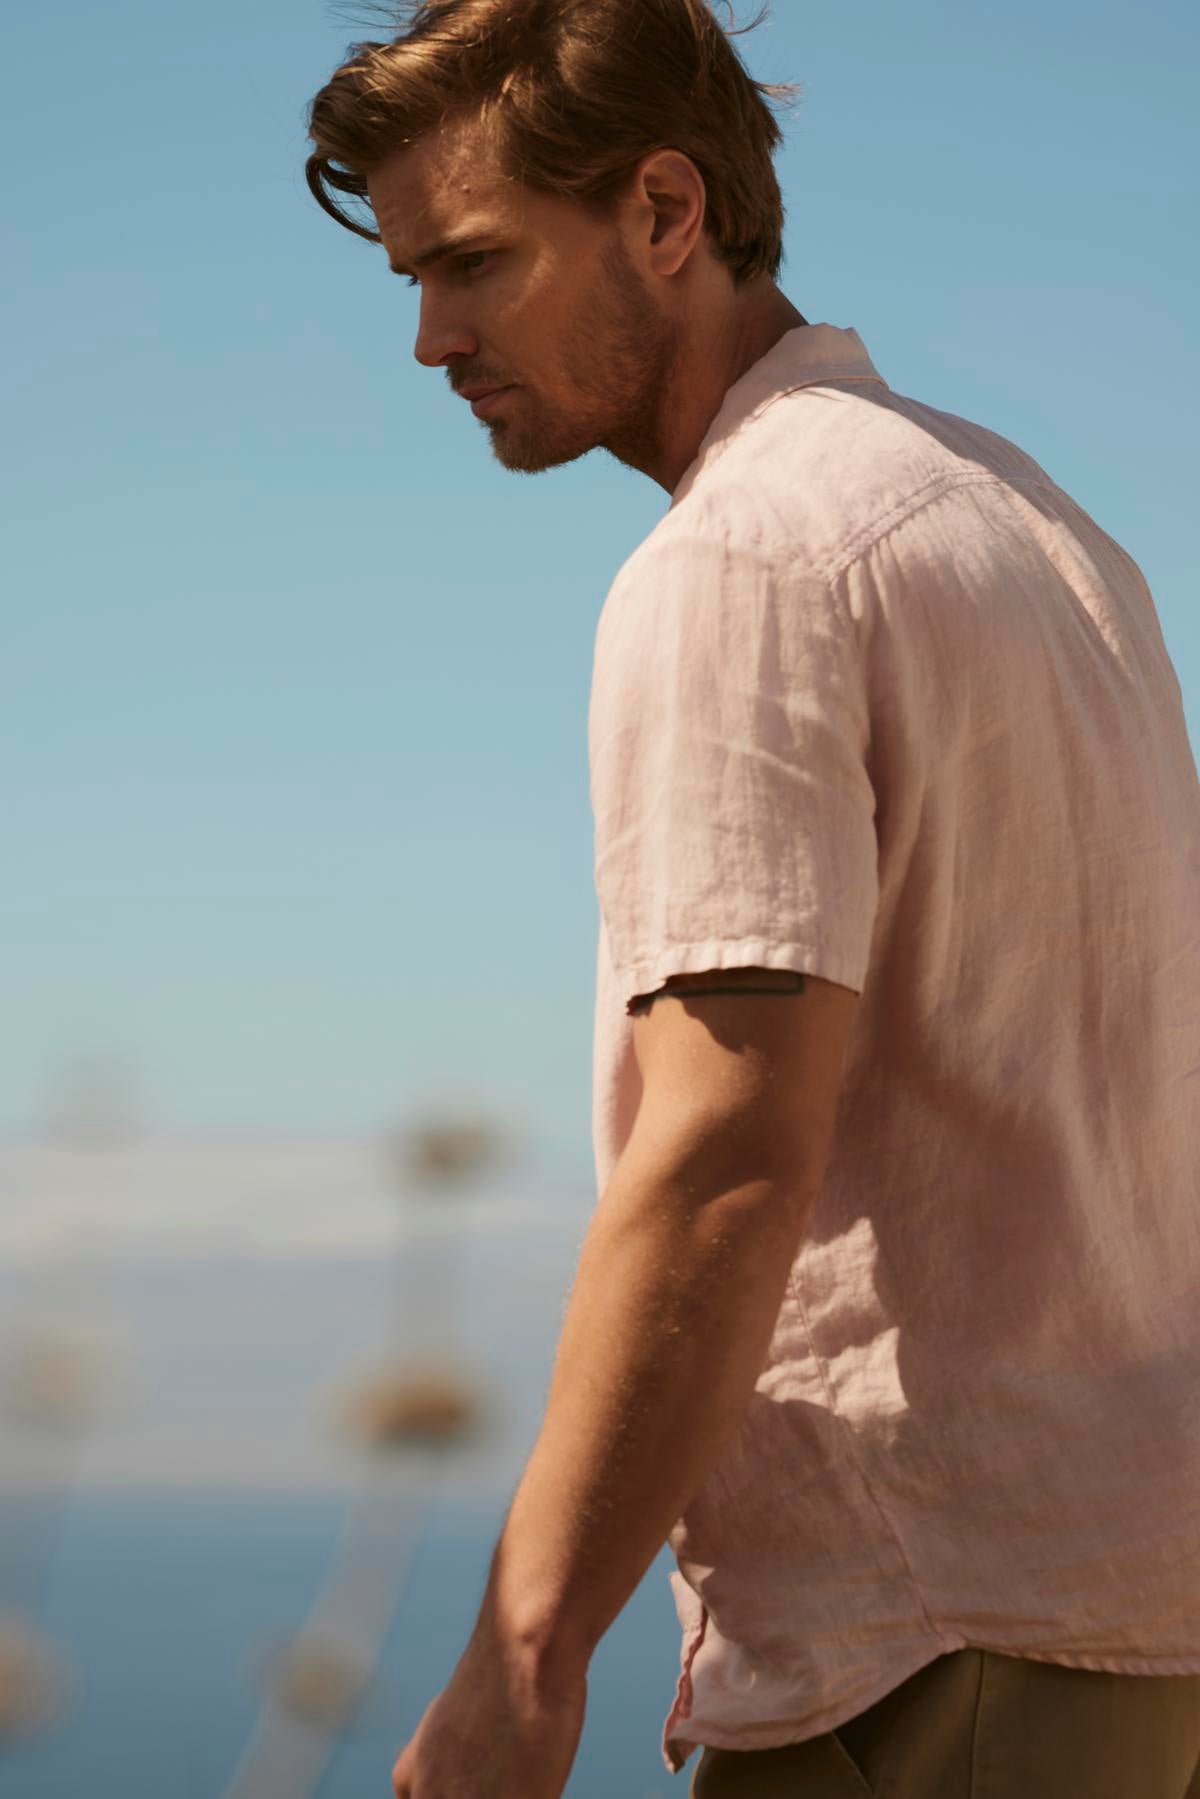 A man with light brown hair wearing a Velvet by Graham & Spencer MACKIE LINEN BUTTON-UP SHIRT gazes thoughtfully with a clear blue sky and blurry maritime background.-36753539596481